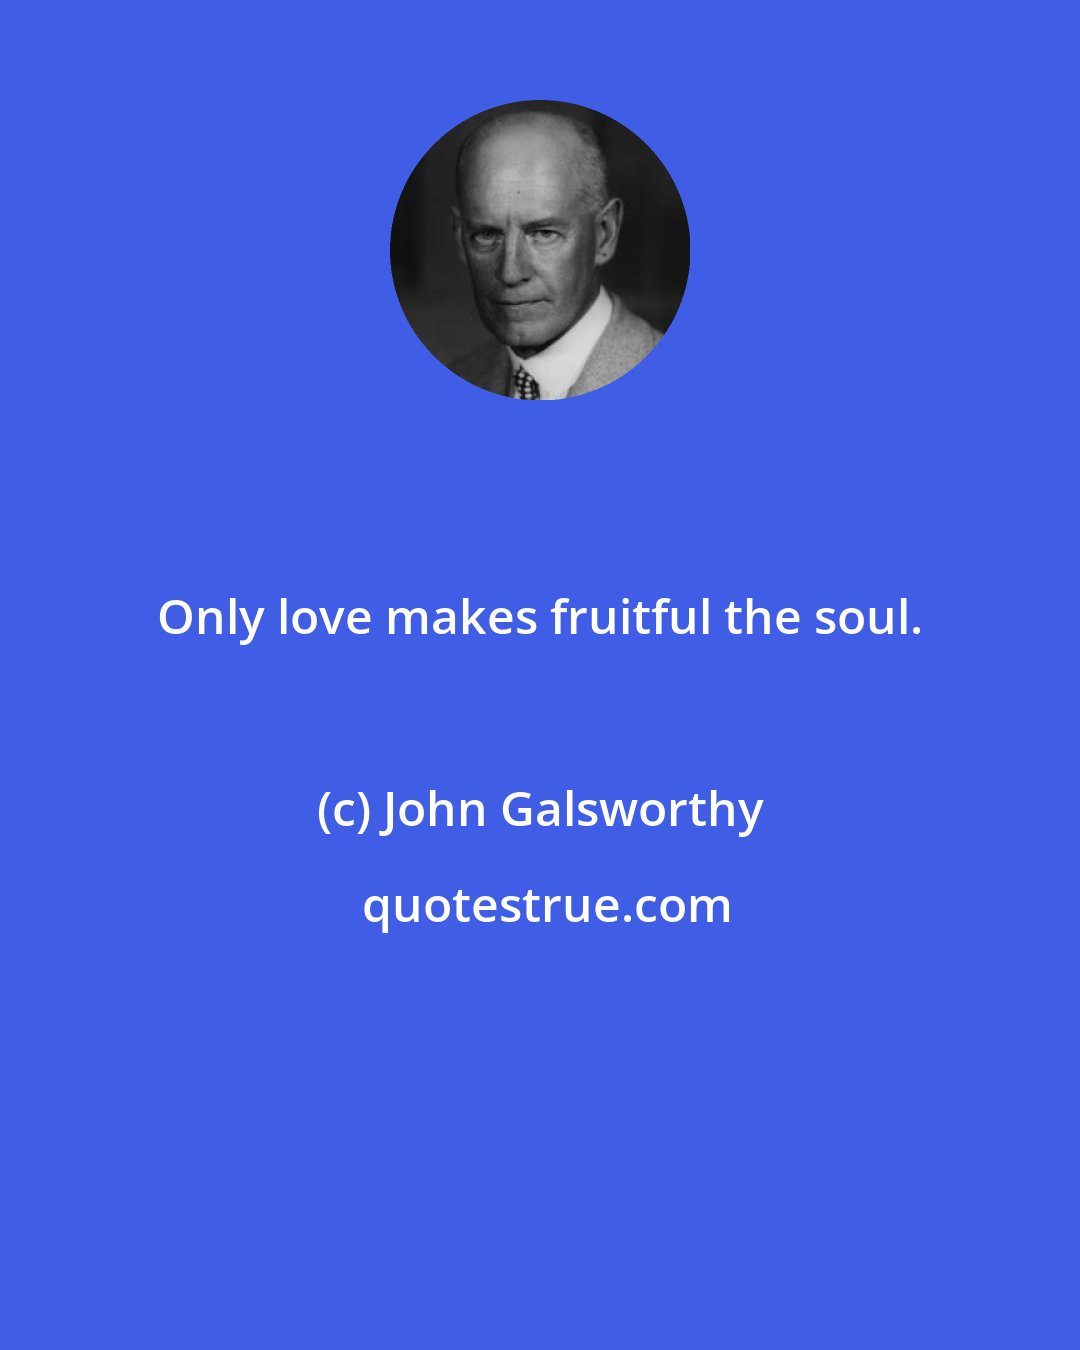 John Galsworthy: Only love makes fruitful the soul.